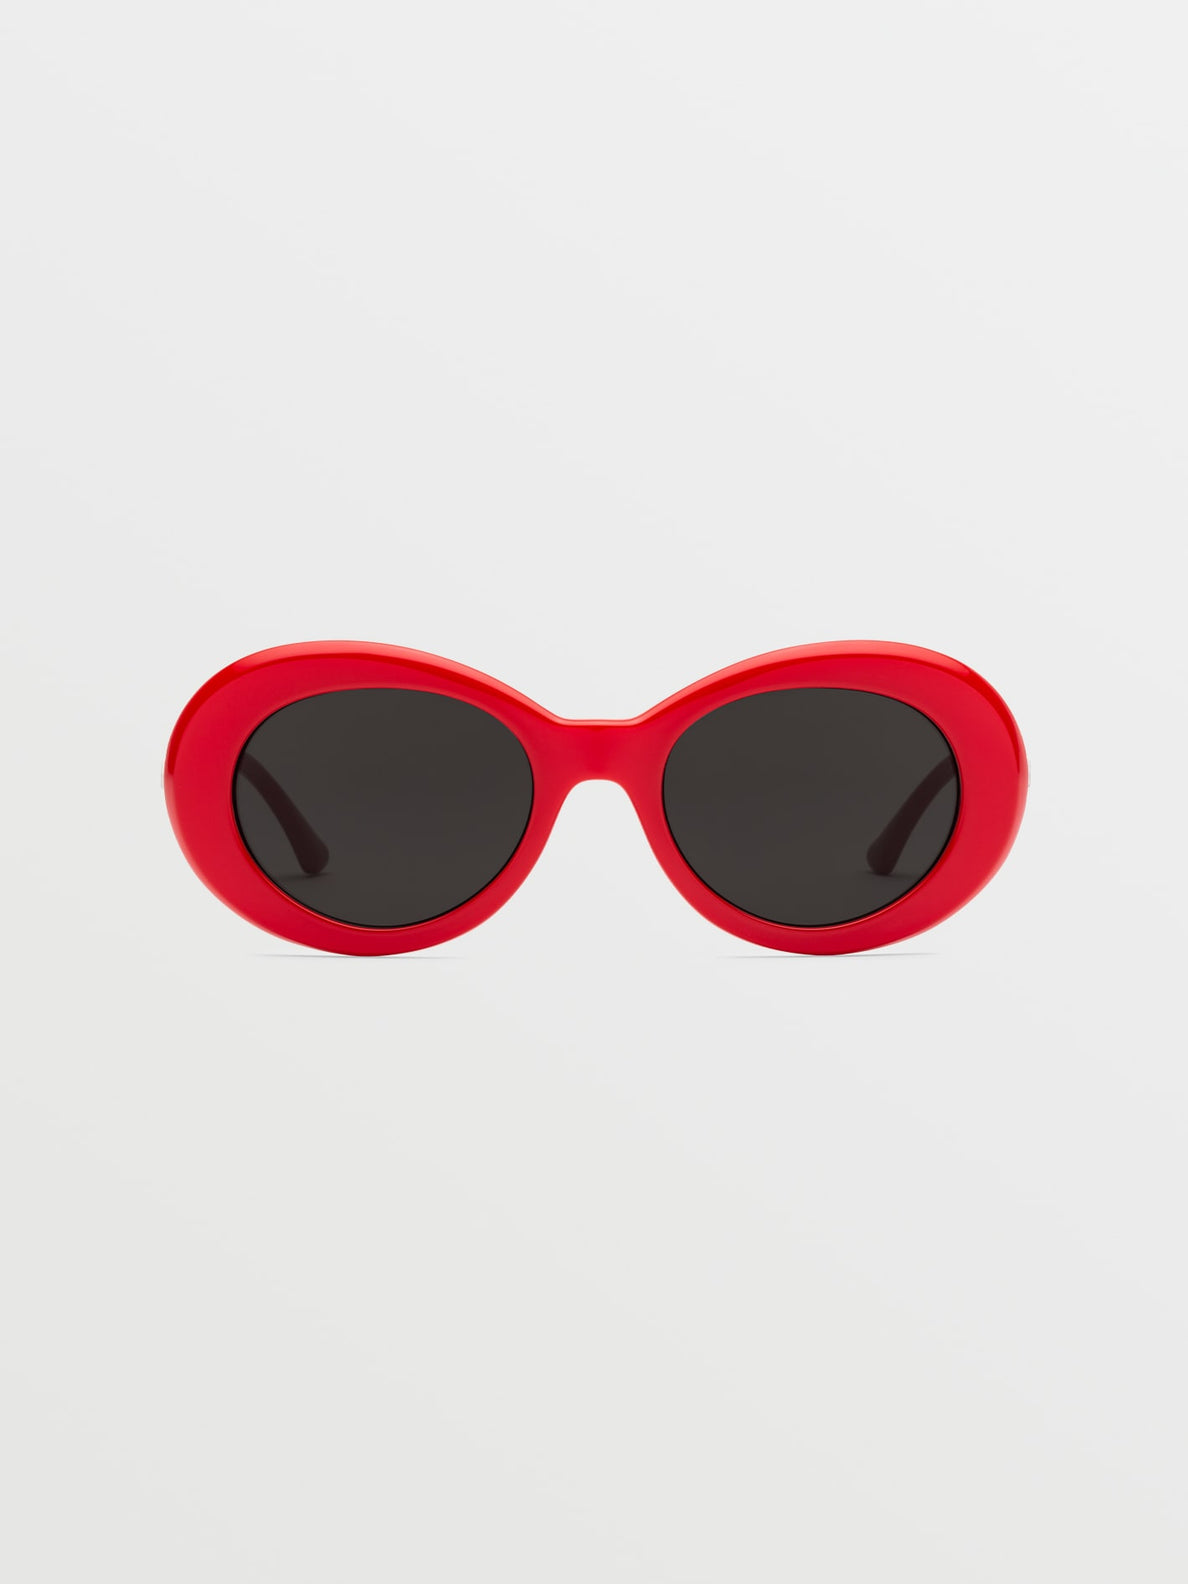 Stoned Sunglasses - Gloss Red/Gray (VE03201301_0000) [F]